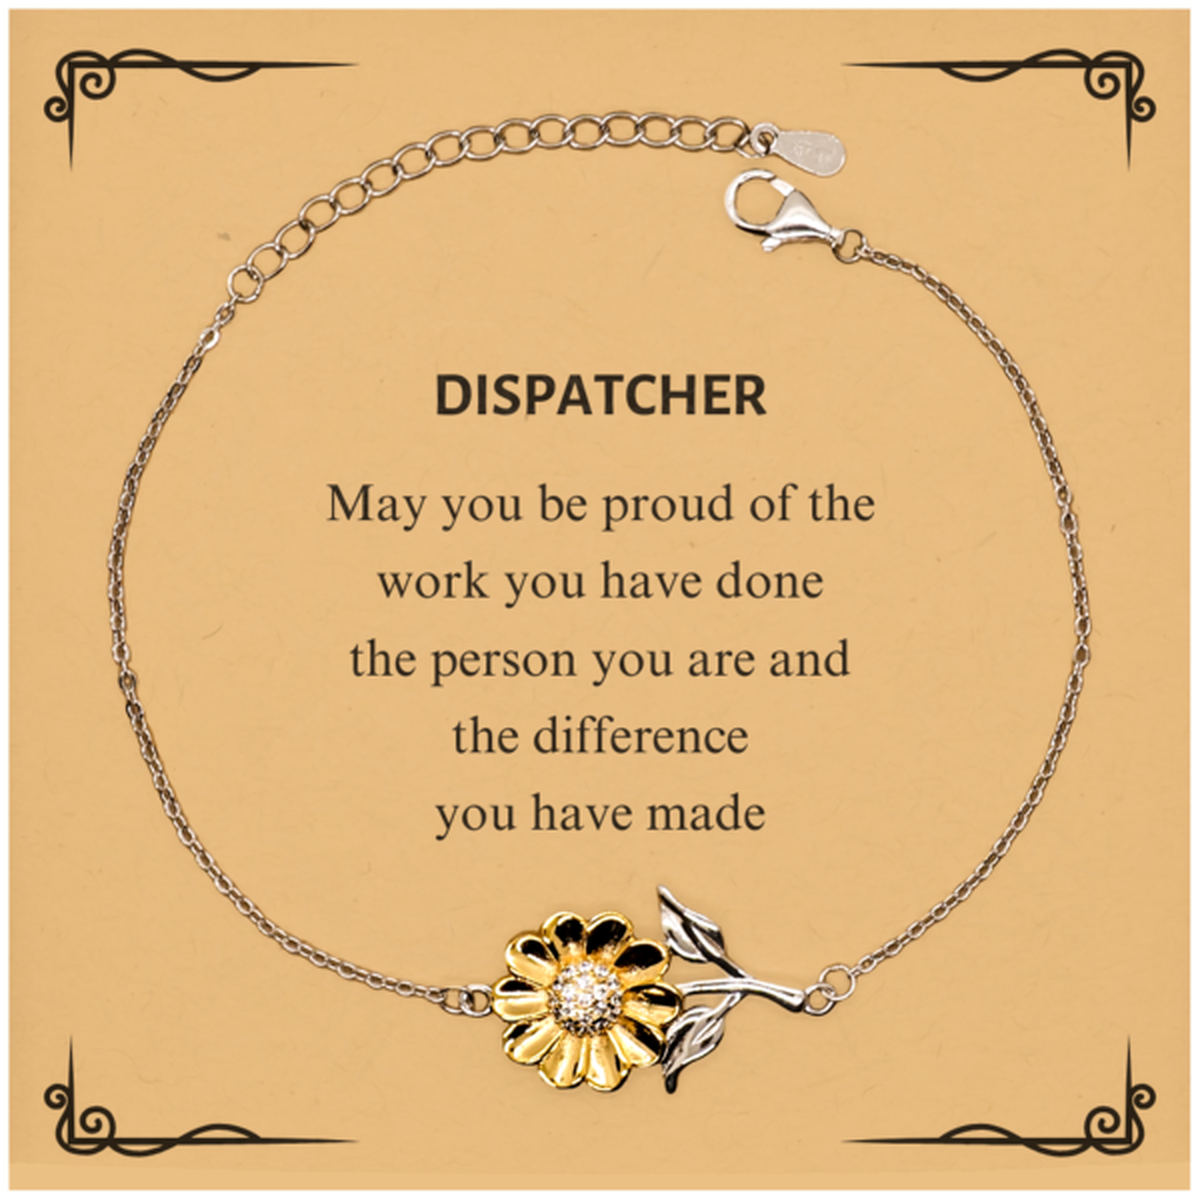 Dispatcher May you be proud of the work you have done, Retirement Dispatcher Sunflower Bracelet for Colleague Appreciation Gifts Amazing for Dispatcher